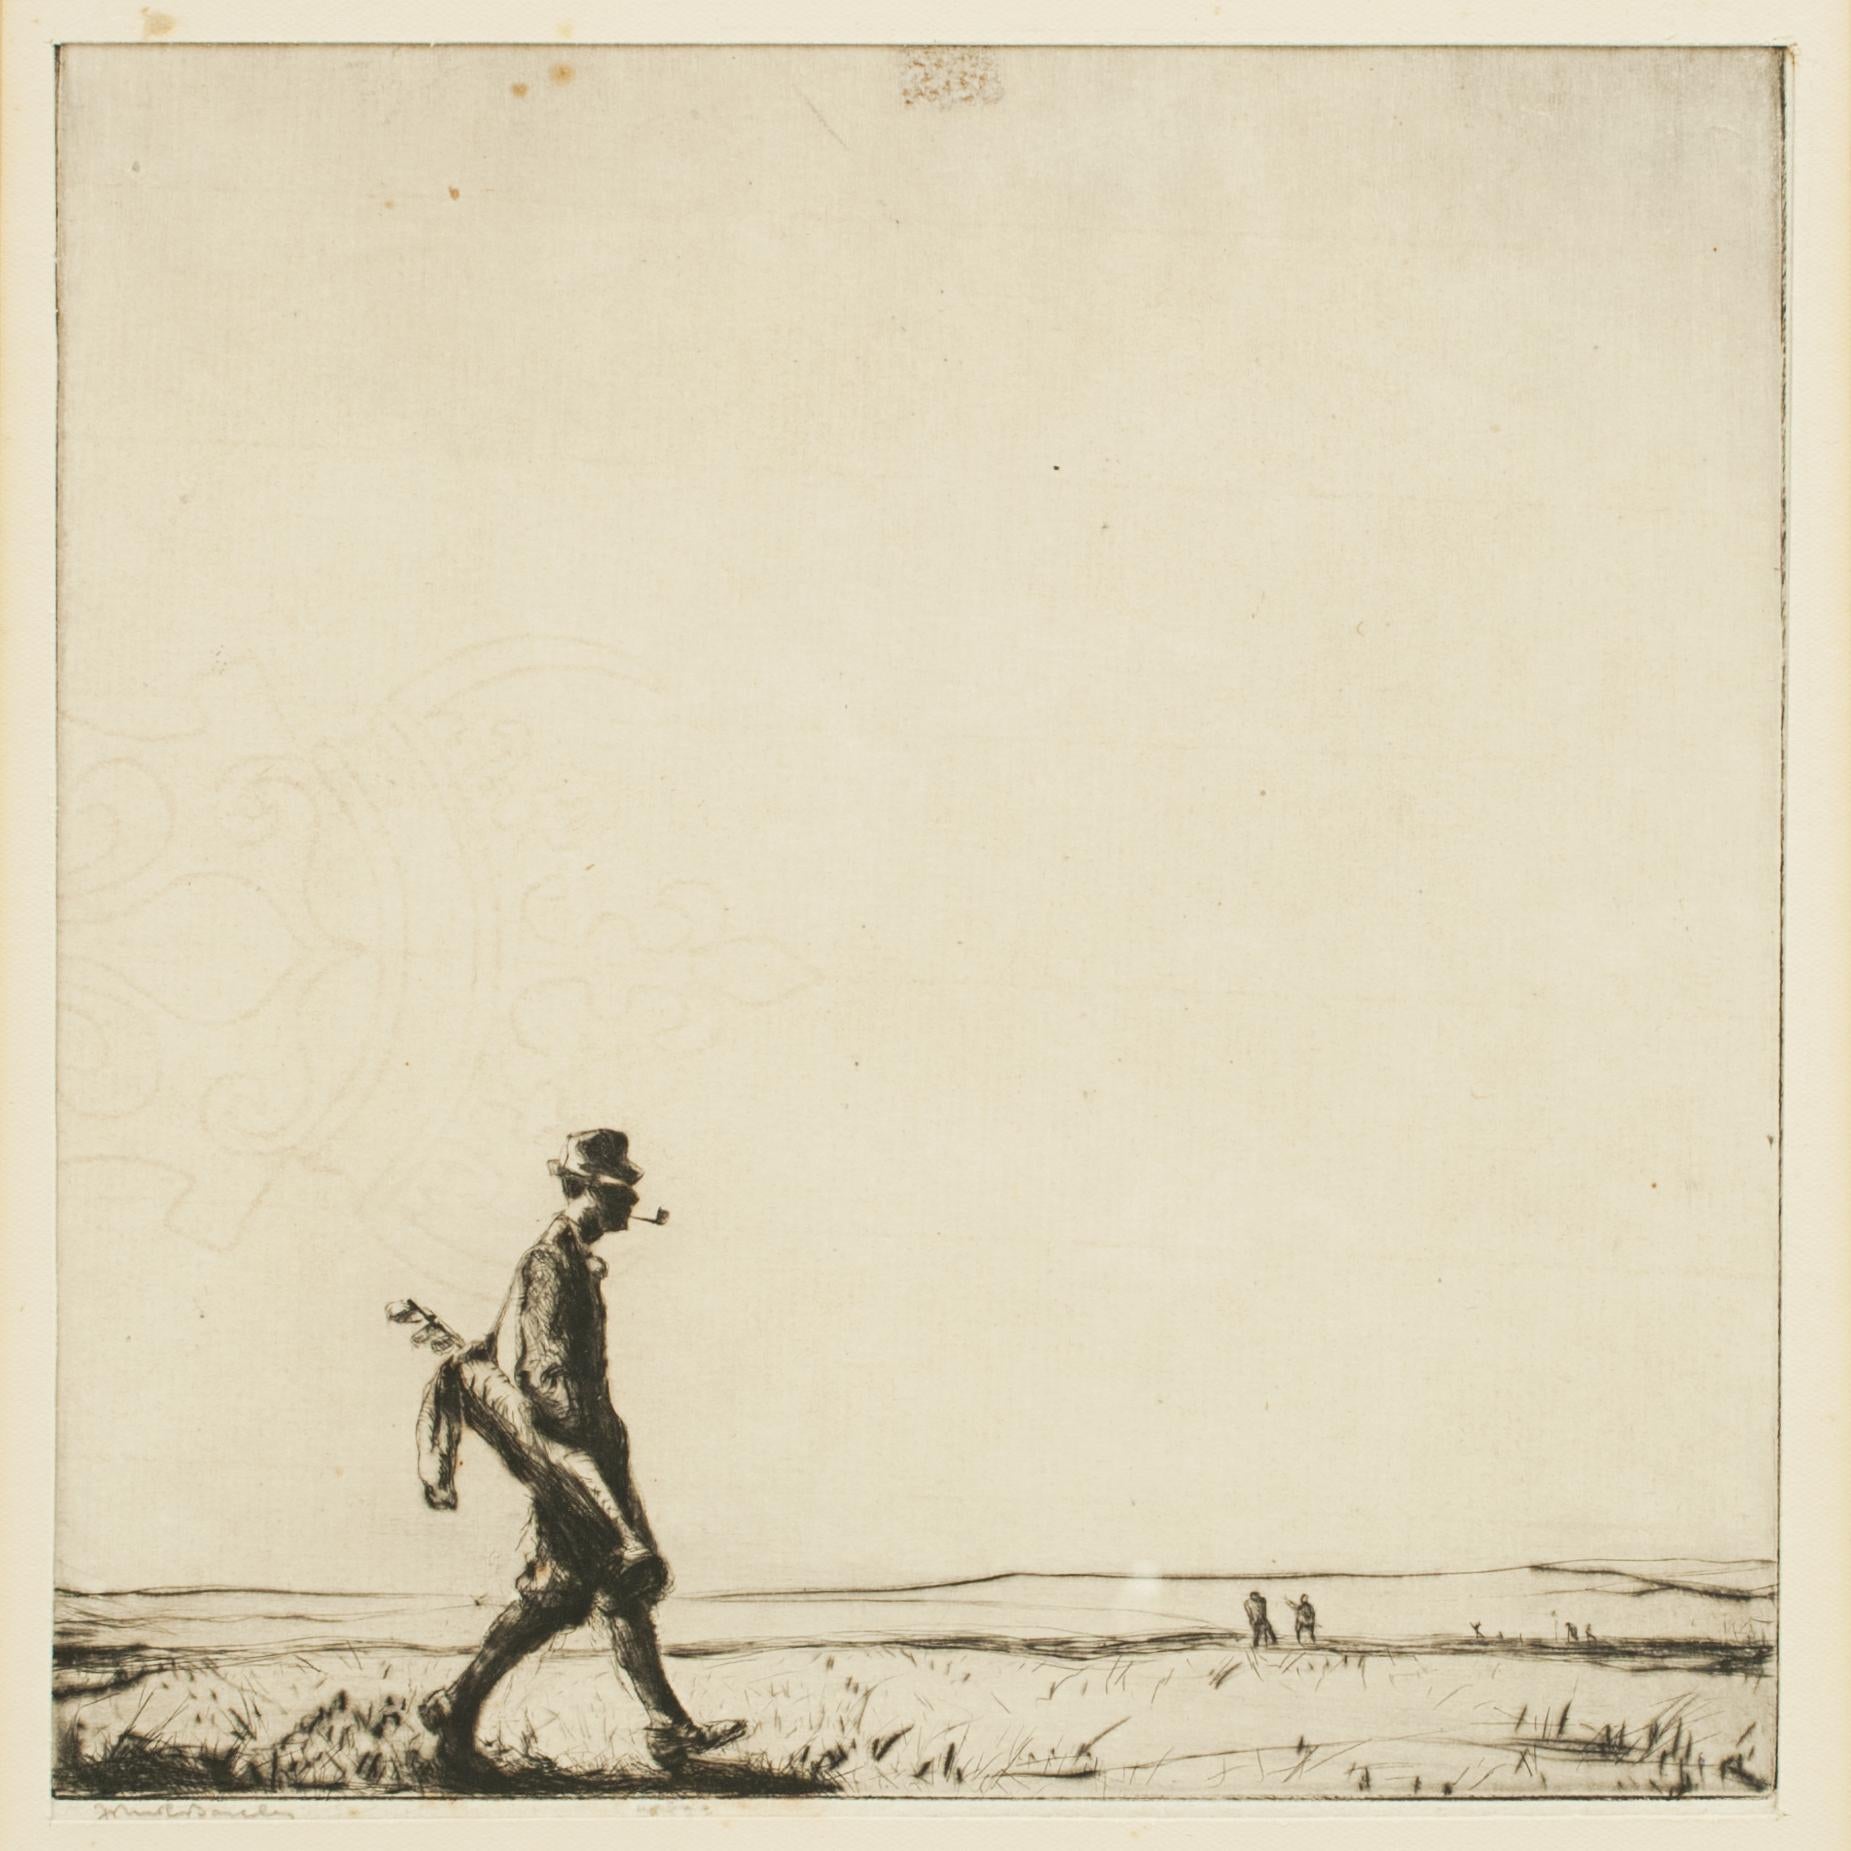 The Golfer.
A black and white 'proof' etching by John R. Barclay. The picture depicts a golfer walking on the golf course smoking a pipe, carrying his golf bag over his shoulder. The fine original dry point etching is on antique laid paper with a